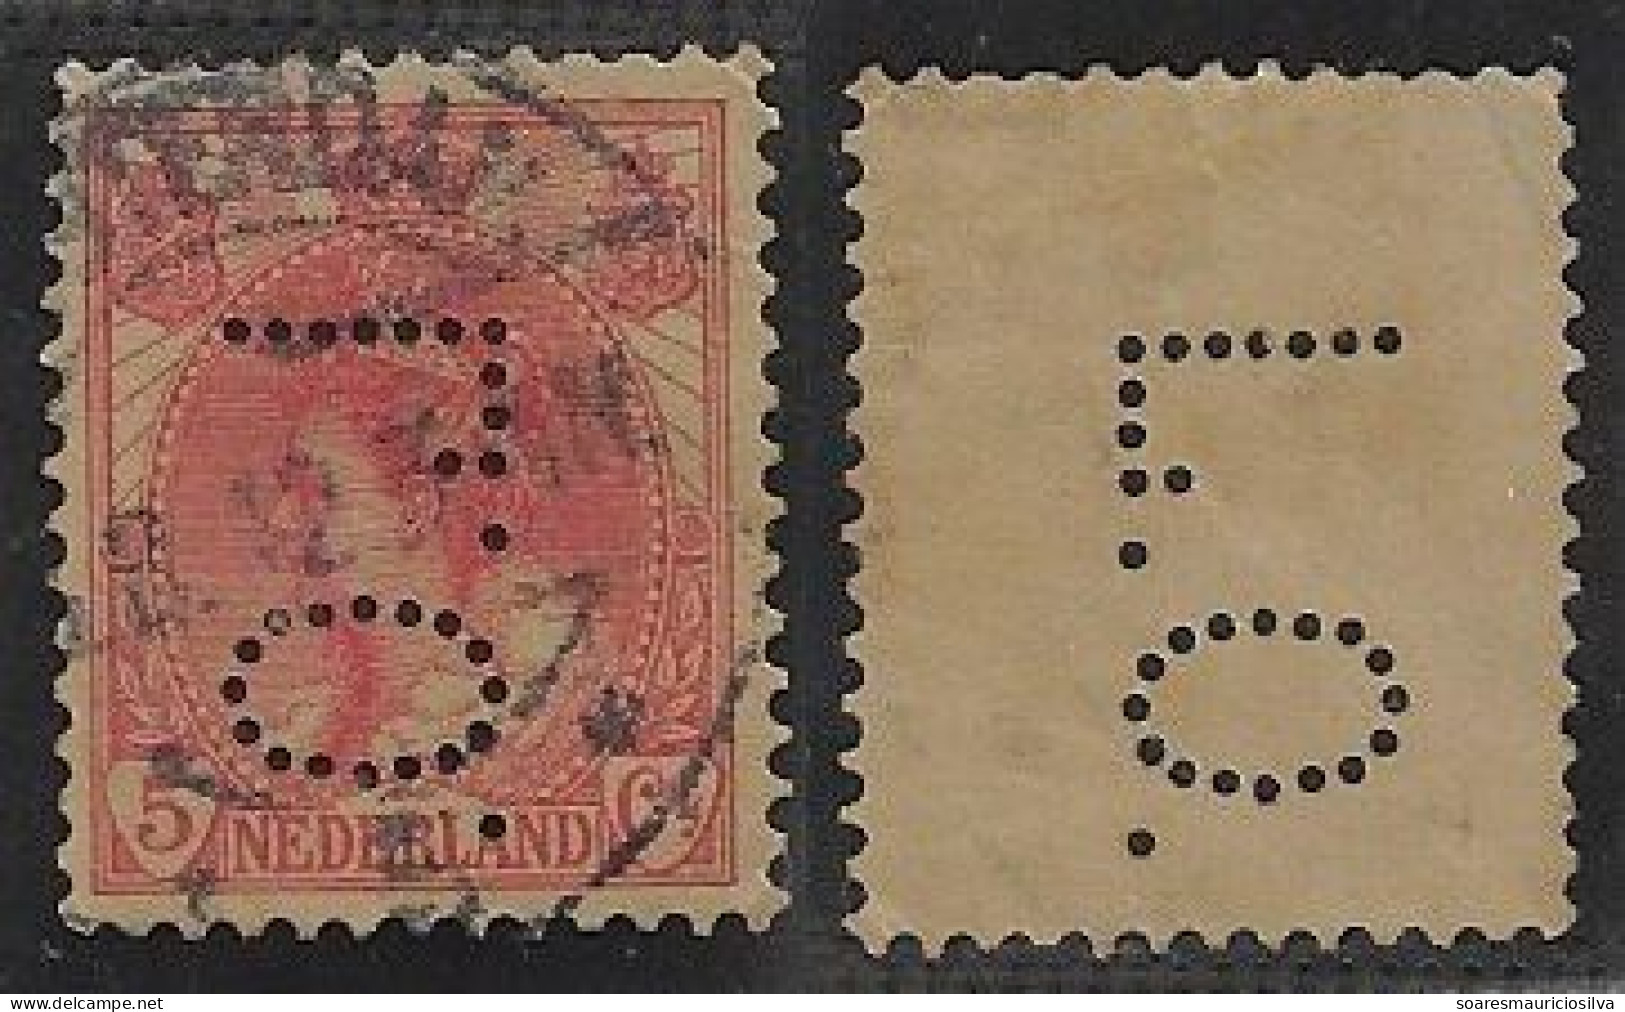 Netherlands 1906/1913 Stamp With Perfin L.O. By Labouchere Oyens & Co's Bank From Amsterdam Lochung Perfore - Gezähnt (perforiert)